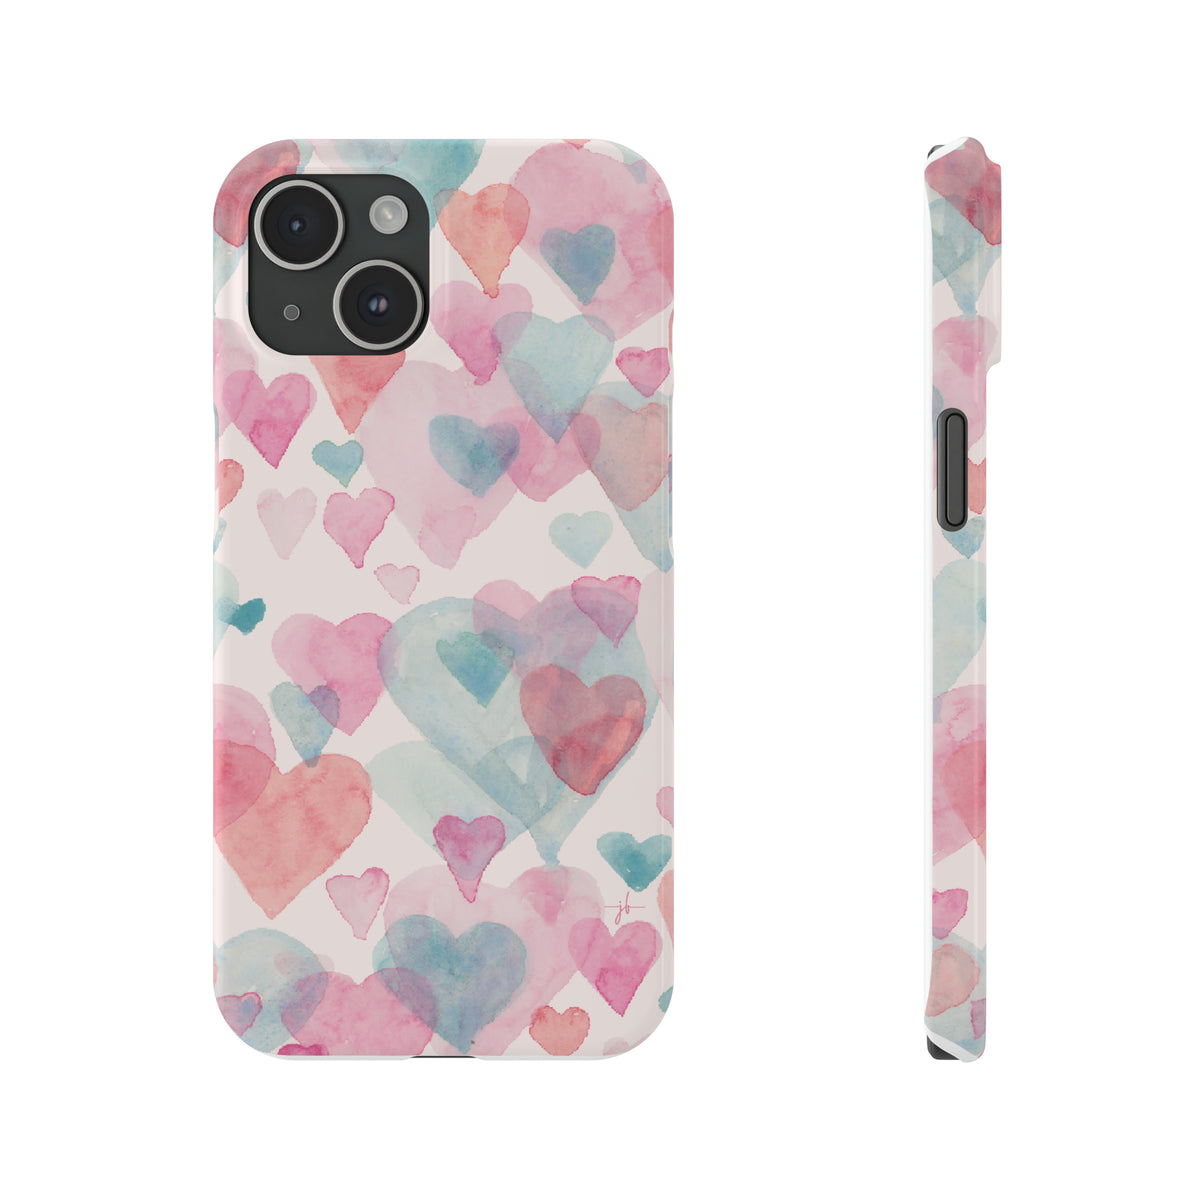 Hearts iPhone Case